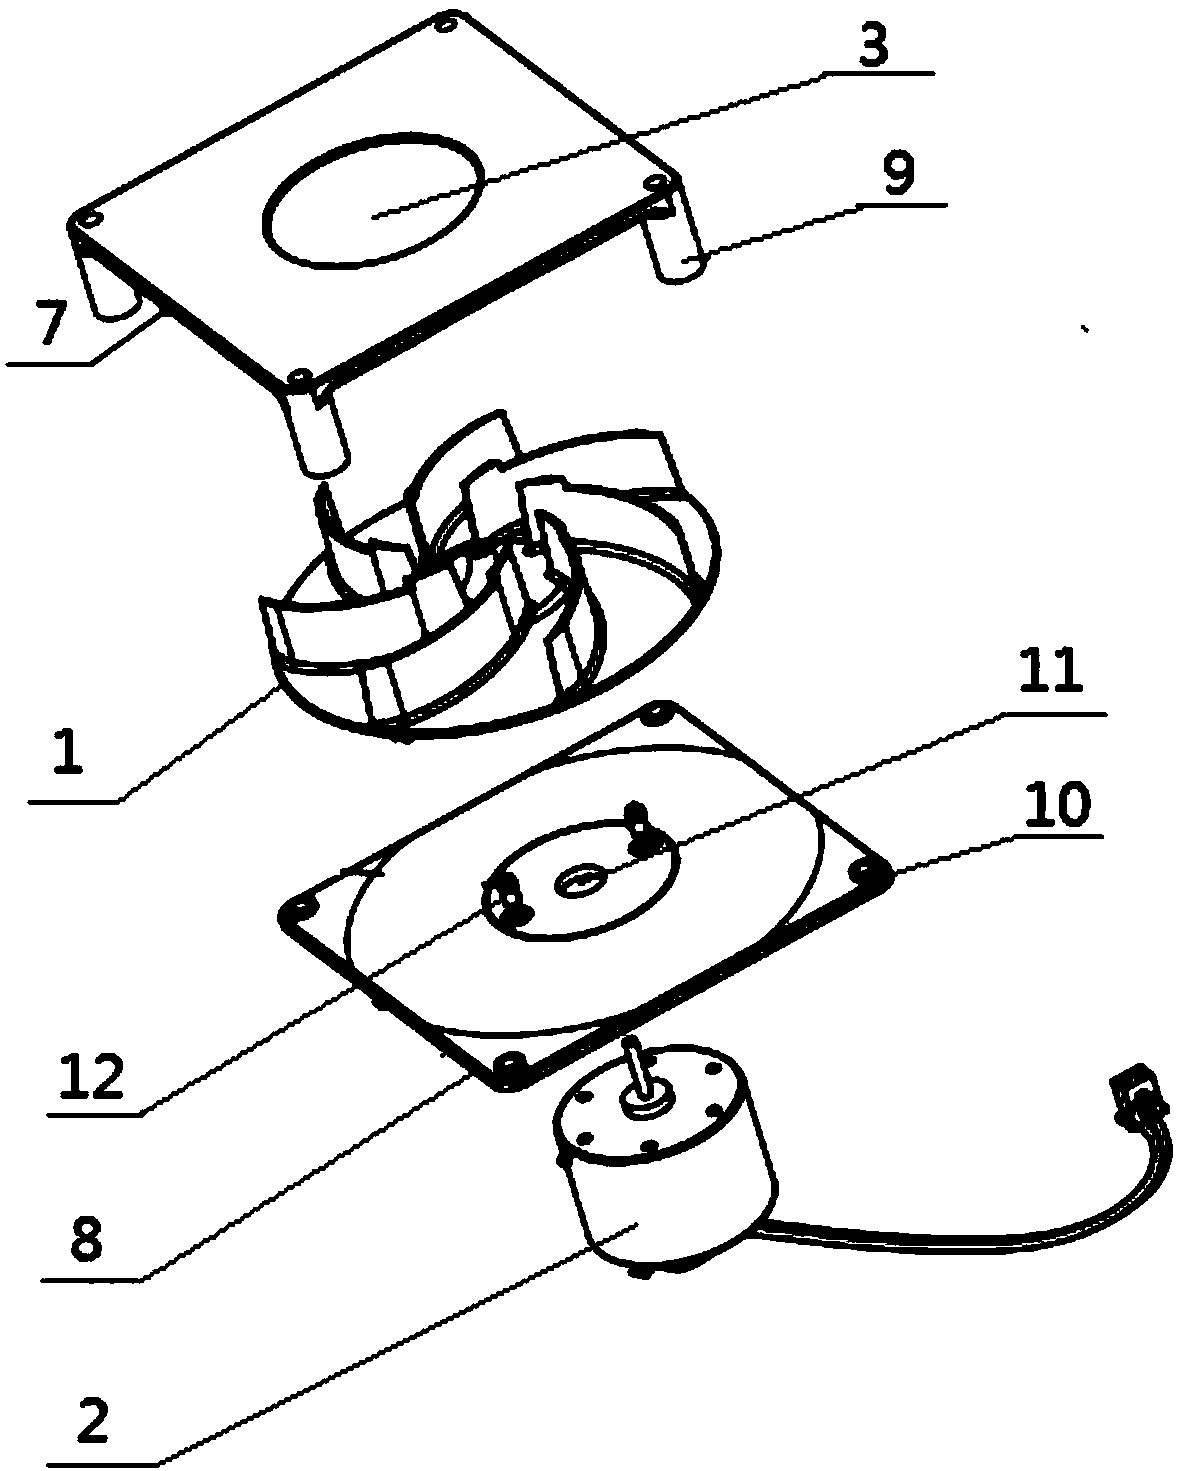 Garbage bag laying device and intelligent garbage can